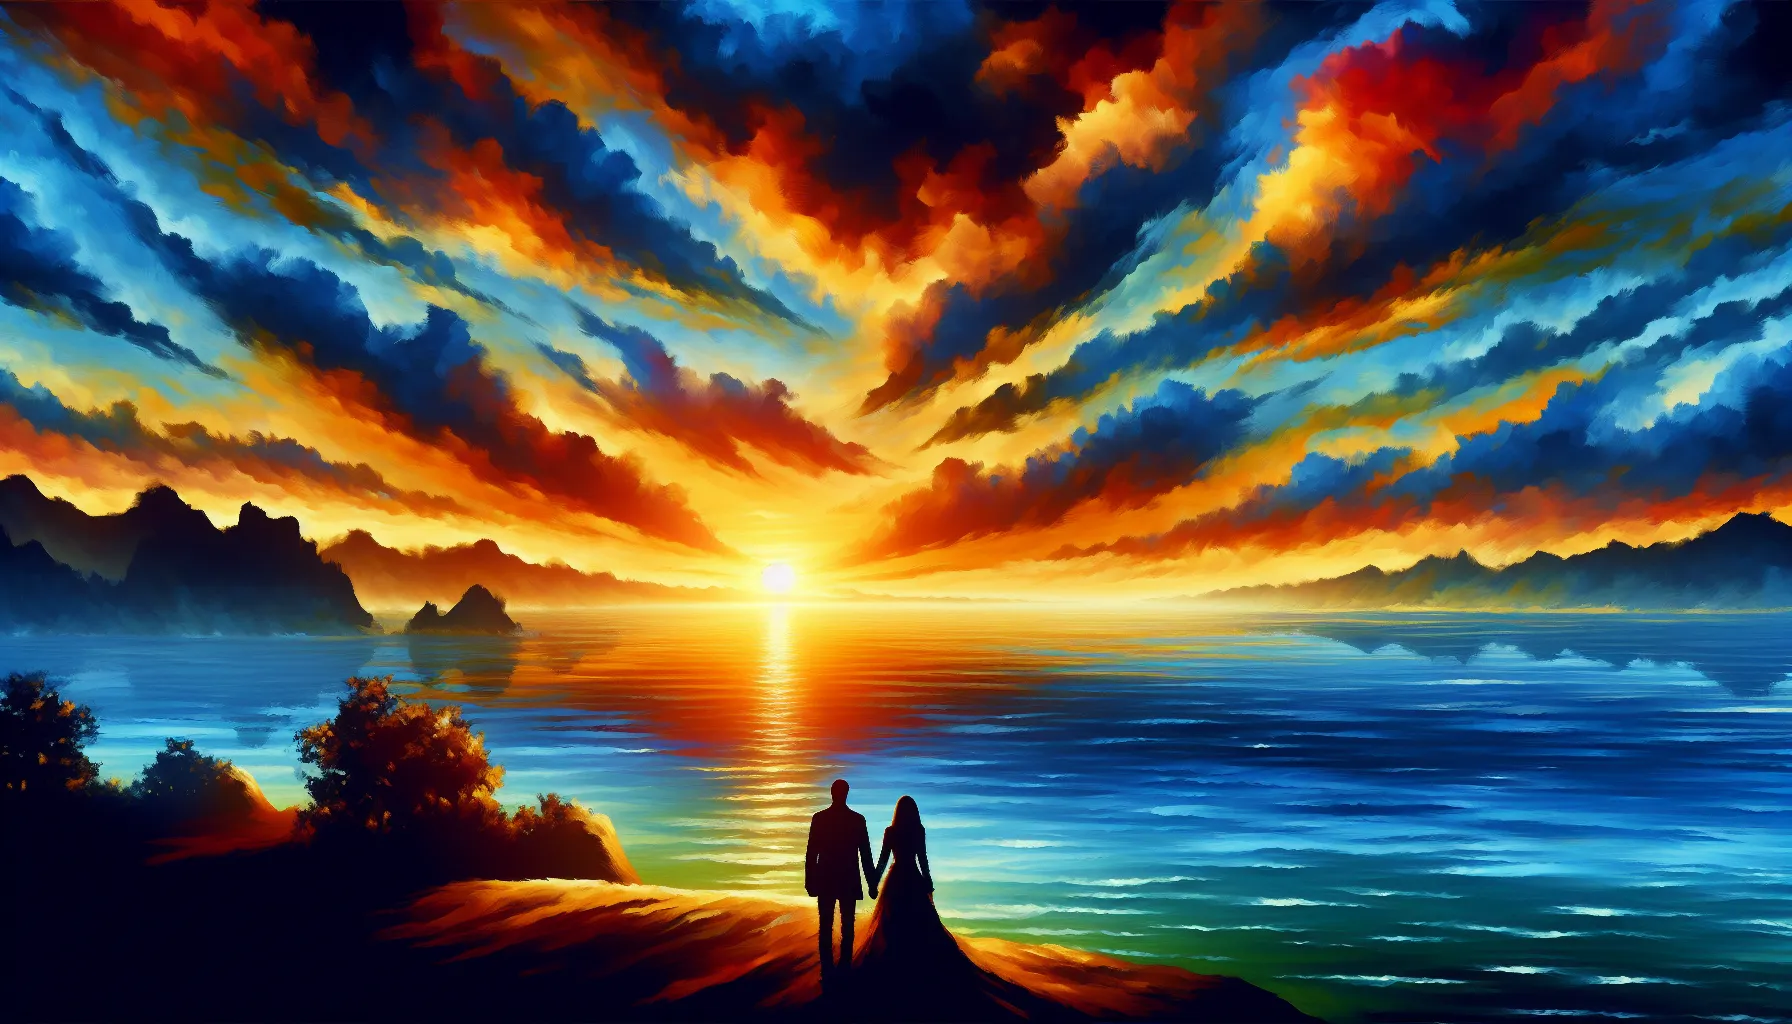 <strong>A horizon of hope:</strong> As the dawn breaks, casting a warm glow over the vast sea of opportunities, it reminds us that the quest for love in our 40s is not just about finding another; it's about discovering a shared future, brimming with potential and painted with the colors of experience.